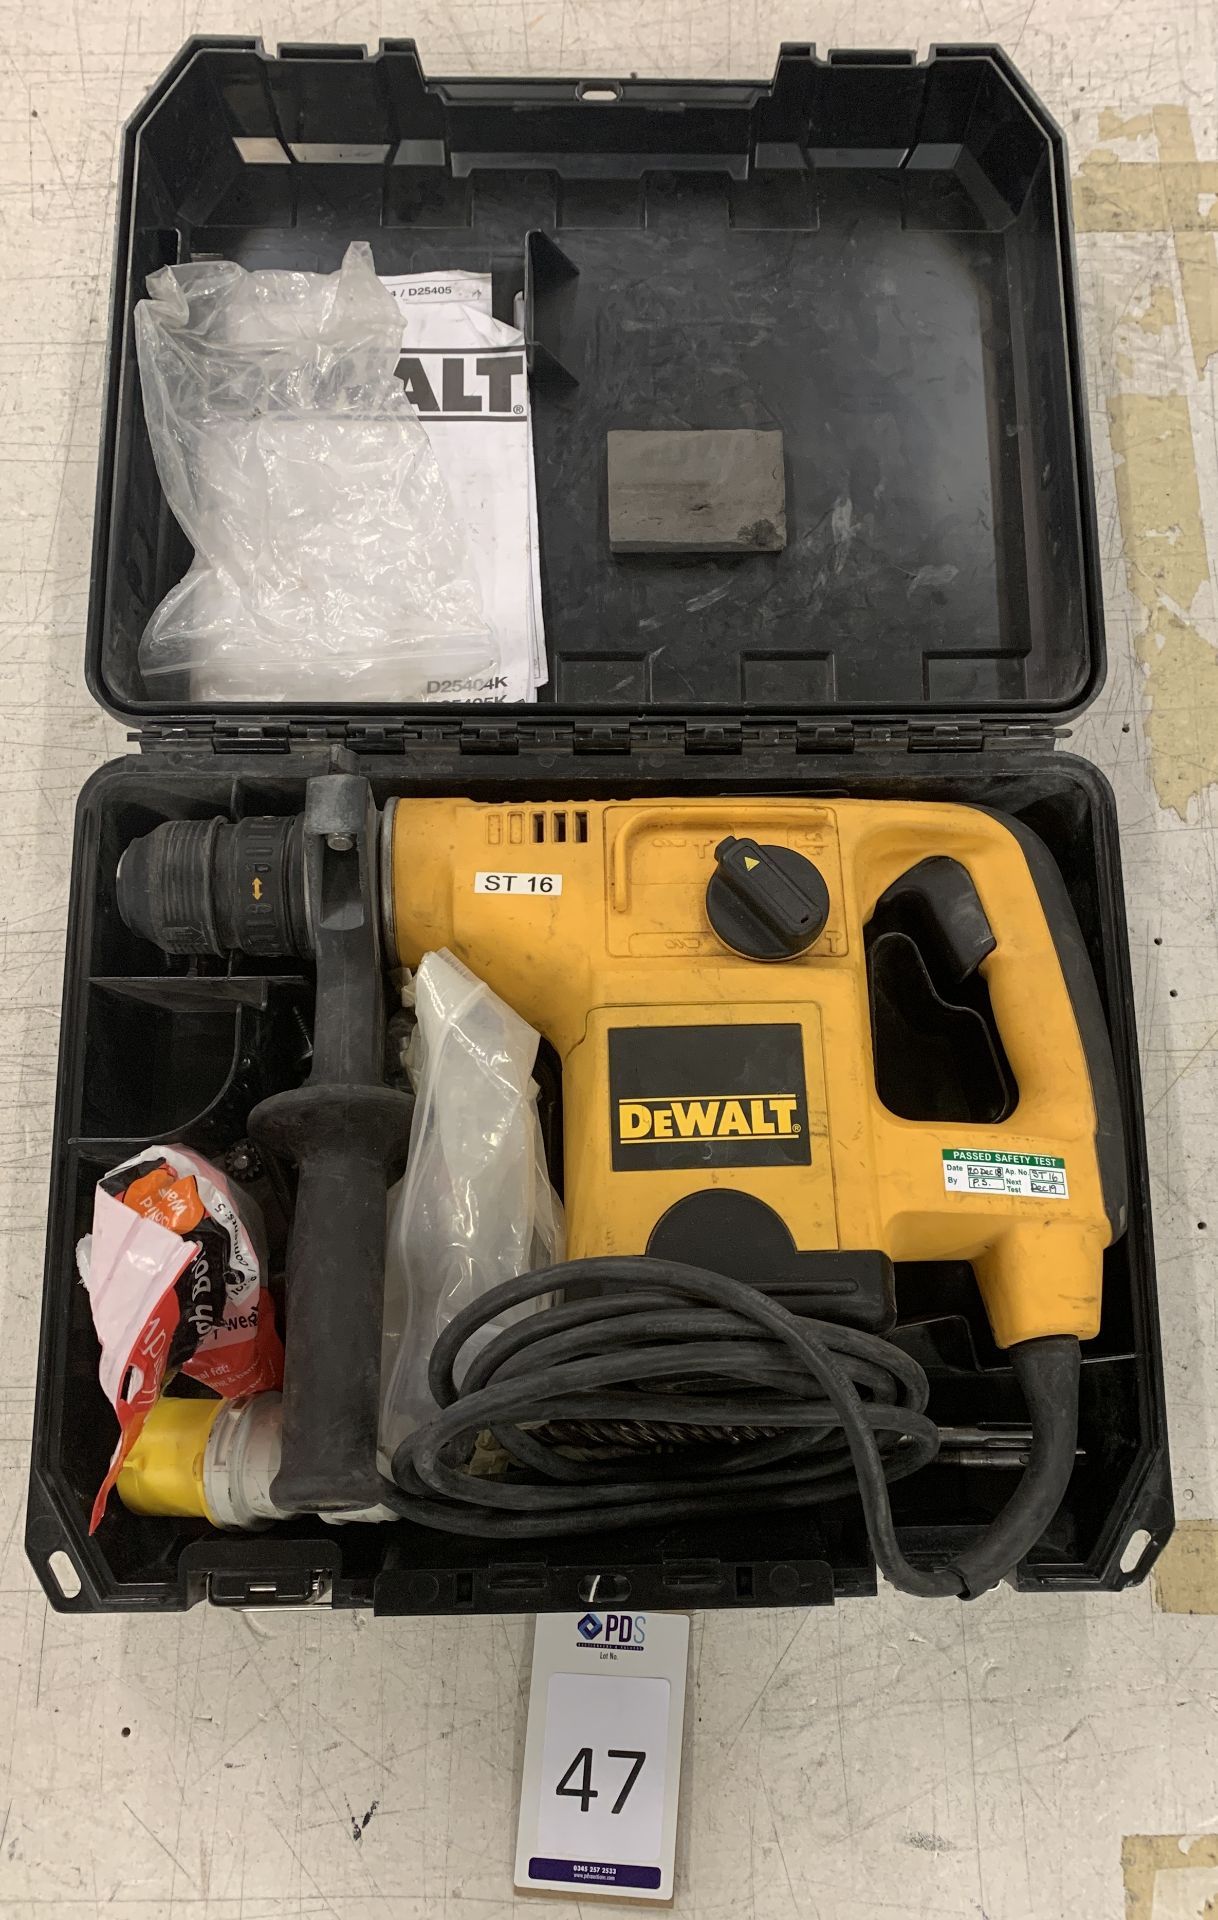 Dewalt D25404 Hammer Drill (Located Norwich – See General Notes for Viewing & Collection Details)